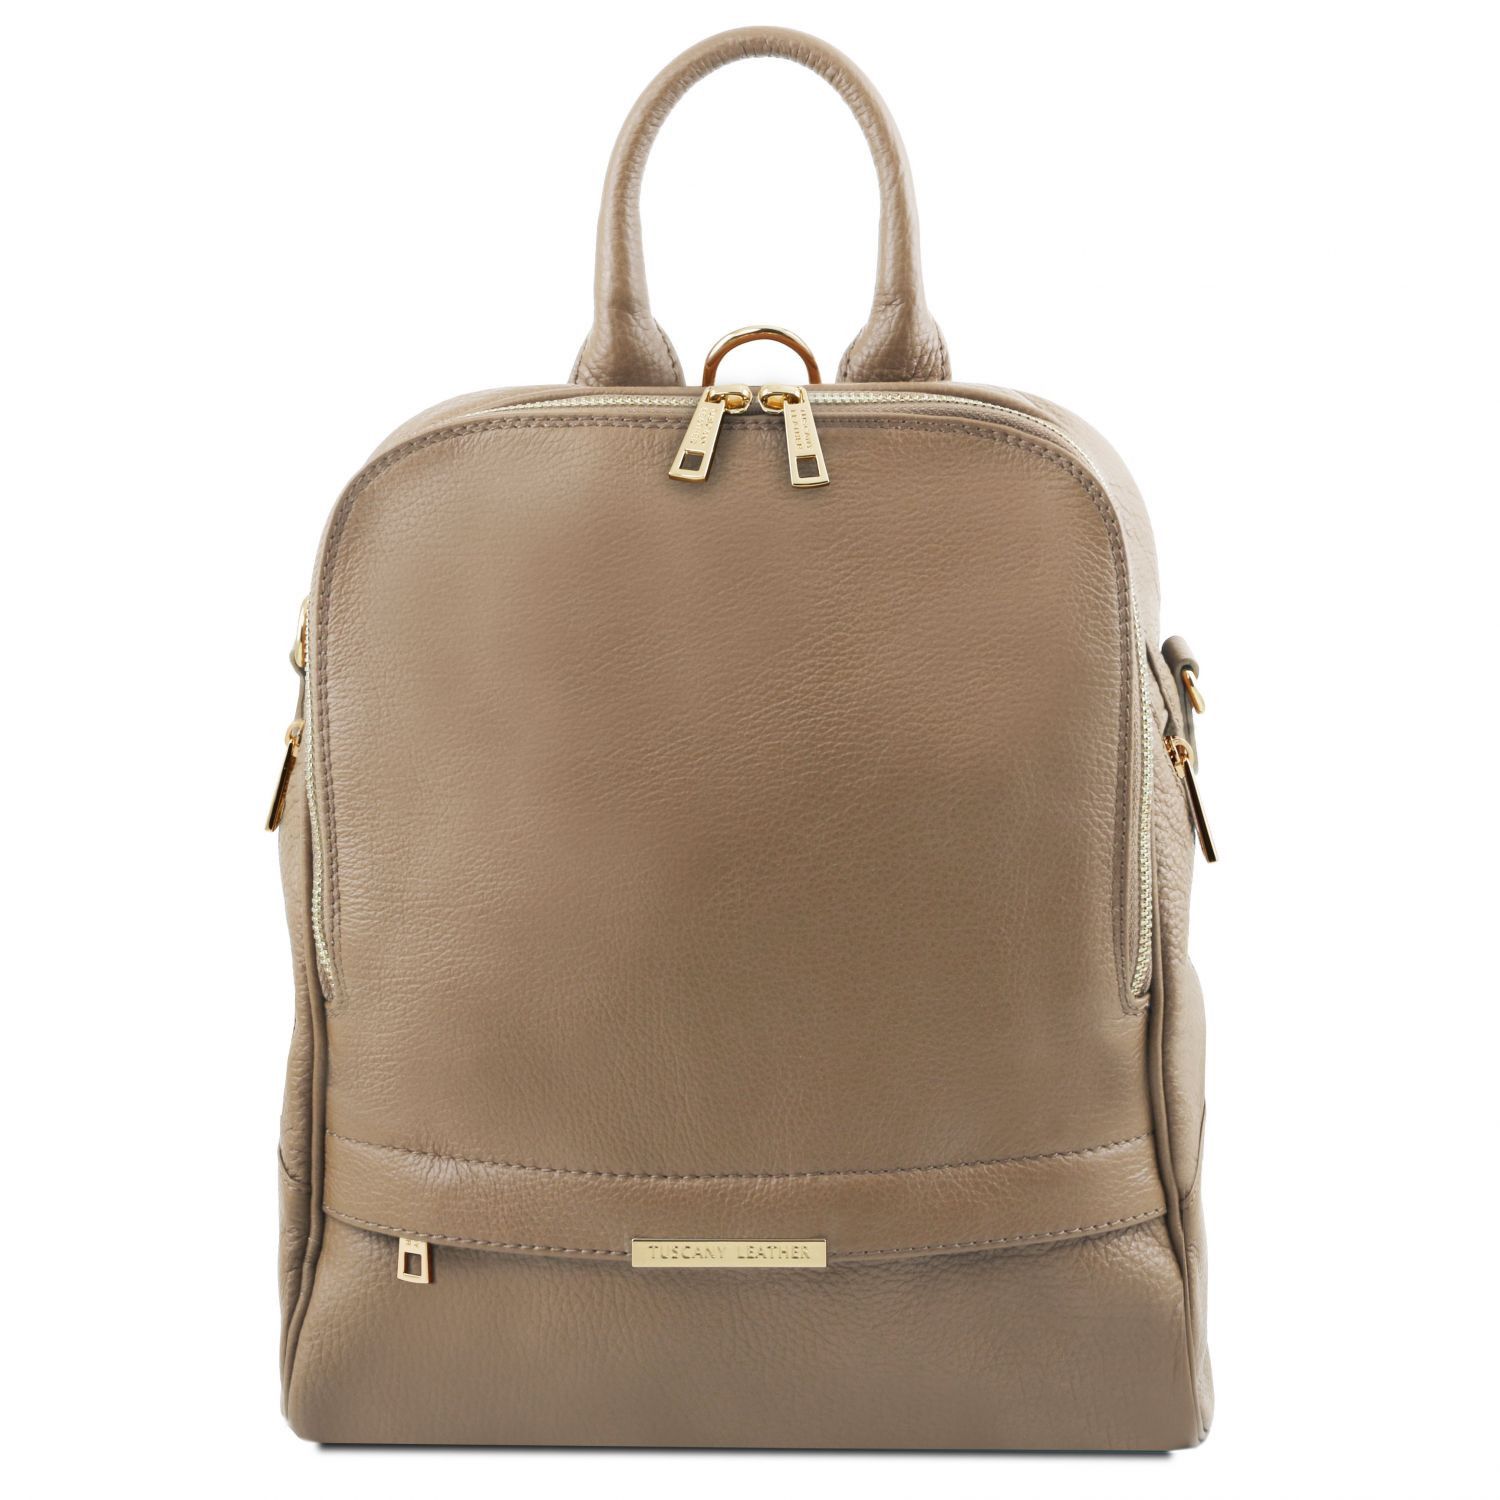 TL Bag Soft Leather Backpack for Women Dark Taupe TL141376